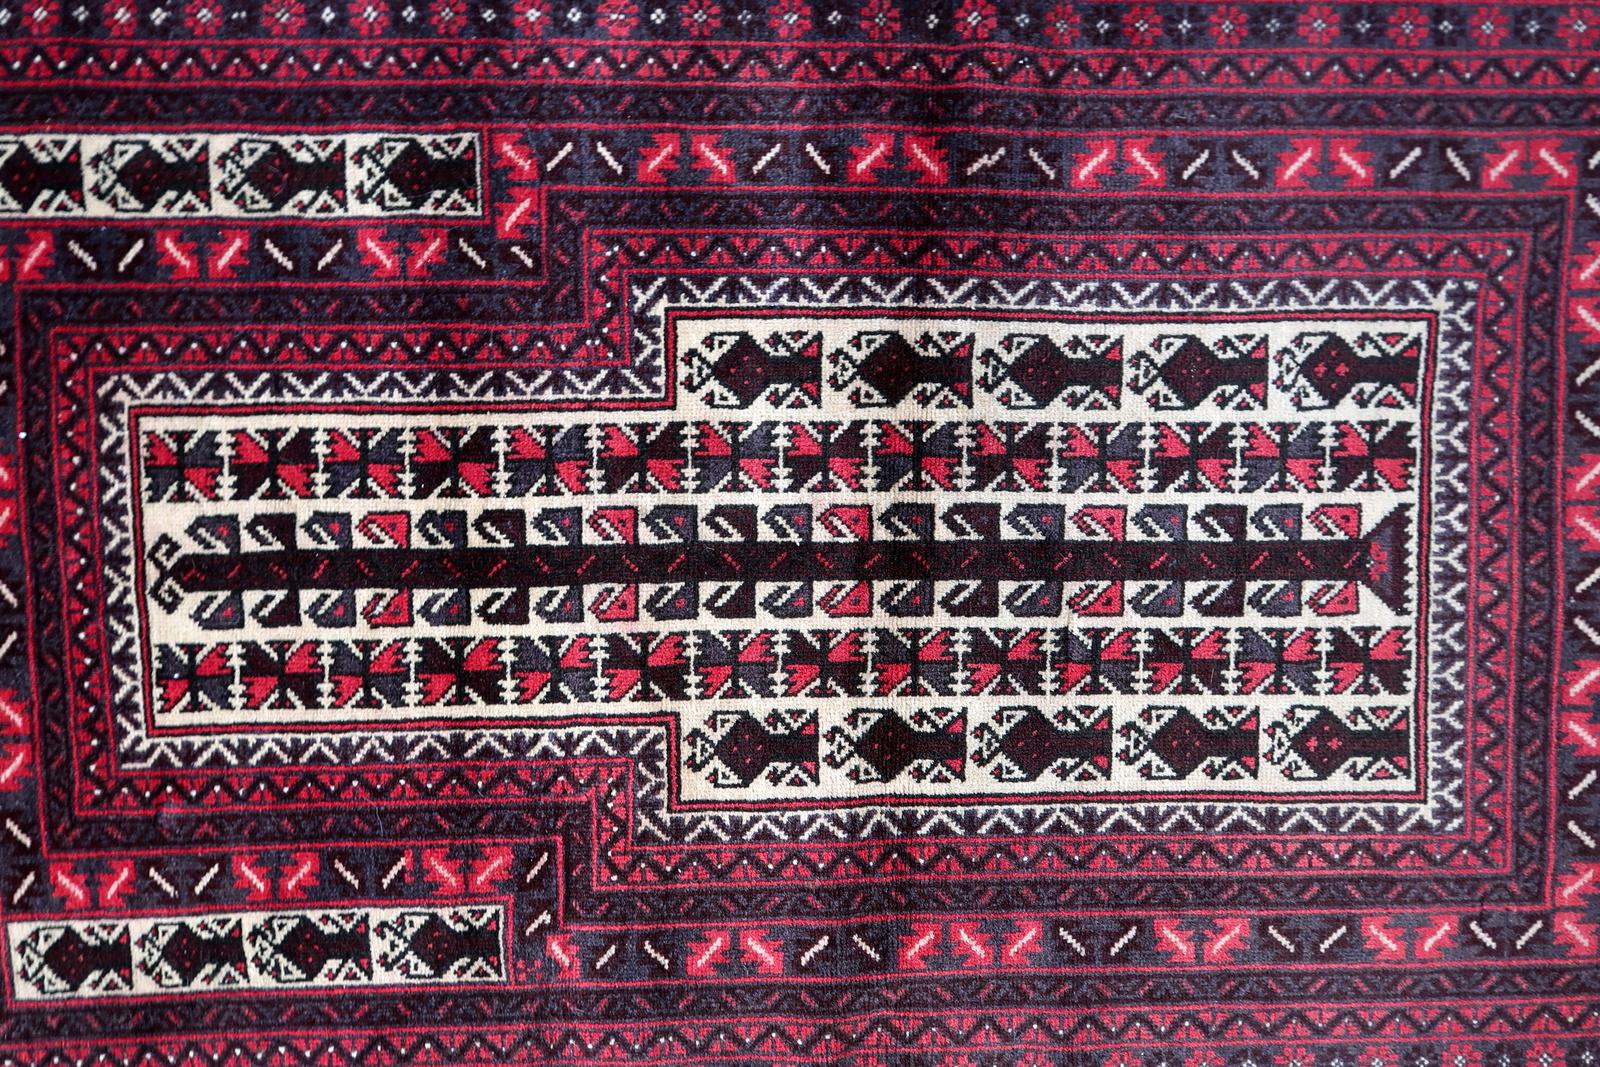 Handmade Vintage Afghan Baluch Prayer Rug 2.6' x 4.5', 1960s, 1C1093 In Good Condition For Sale In Bordeaux, FR